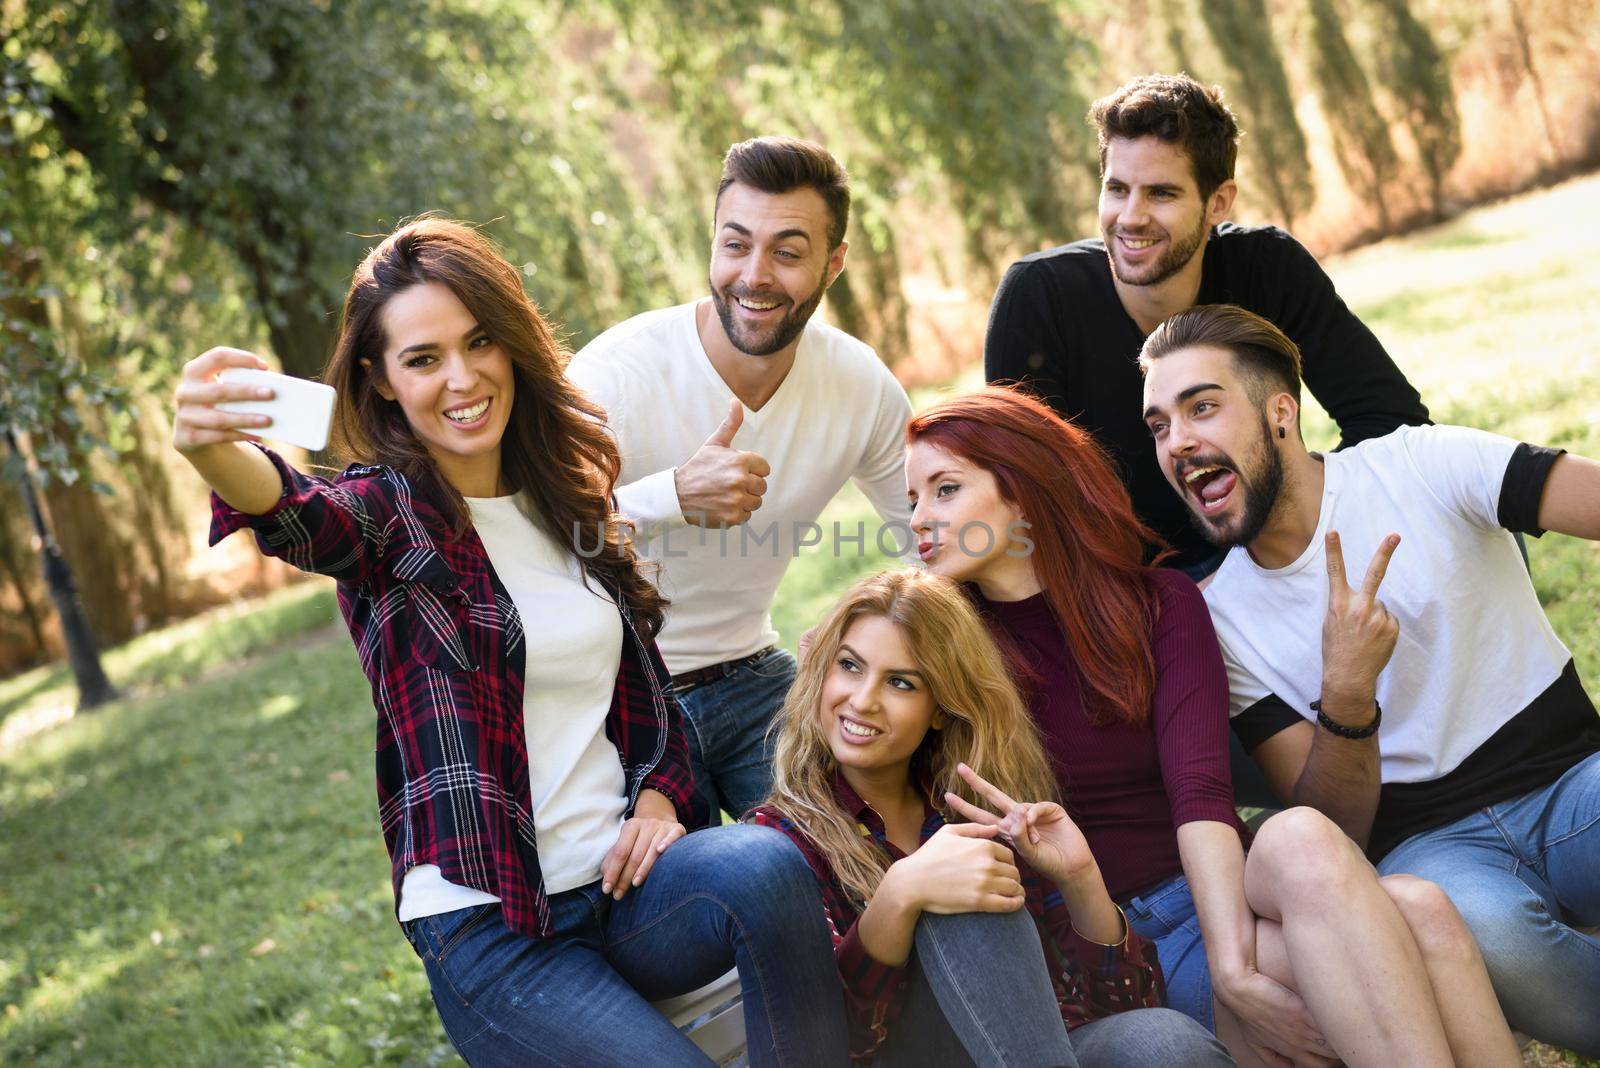 Group of friends taking selfie in urban park. Five young people wearing casual clothes.